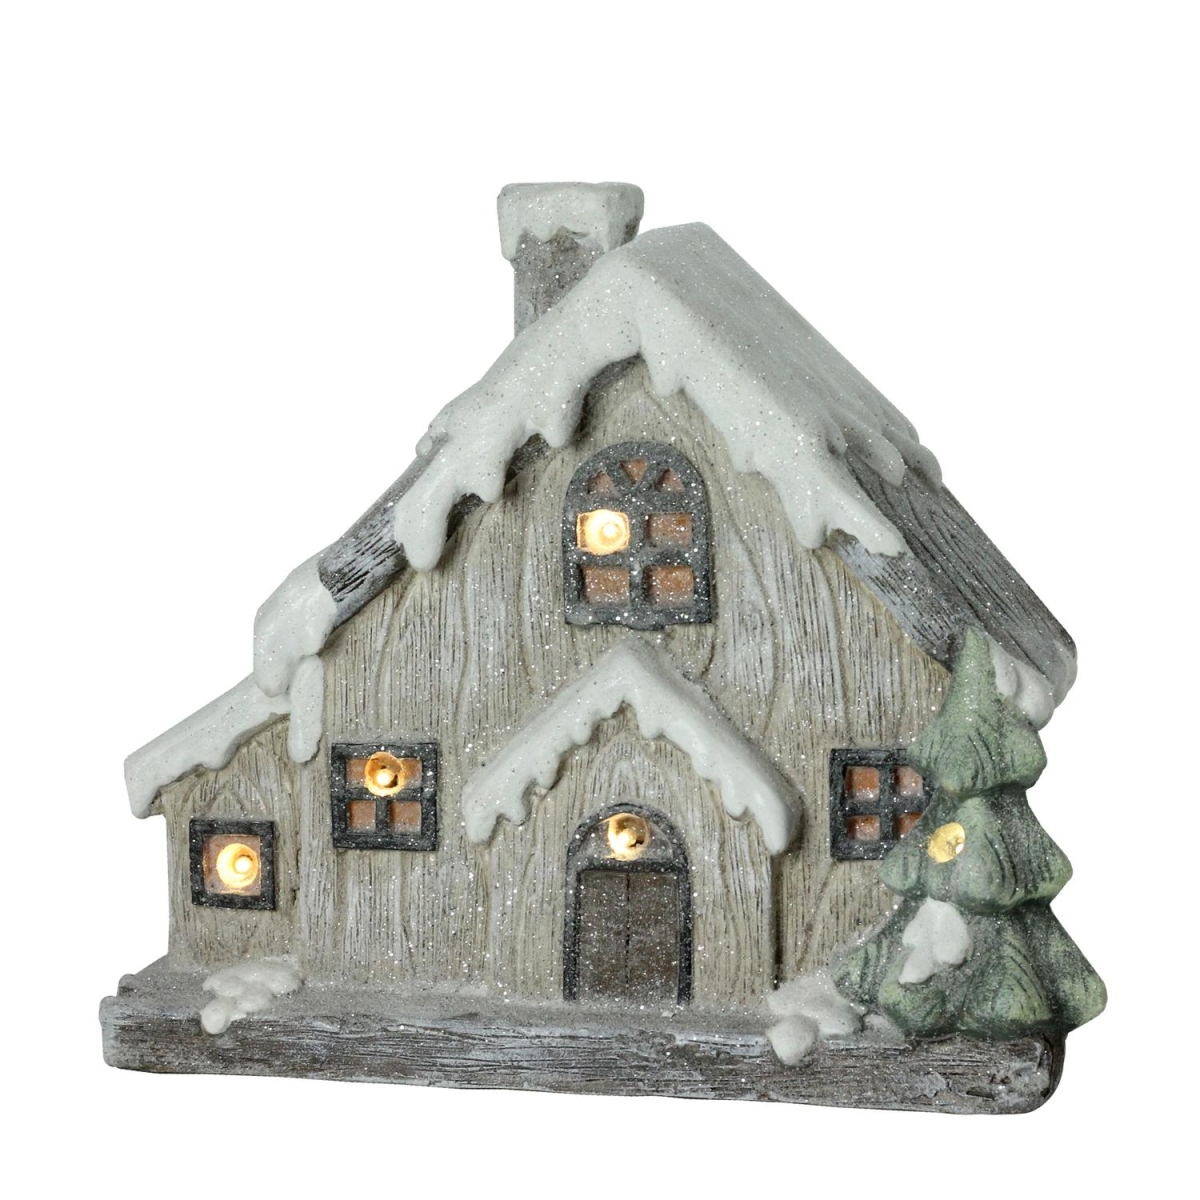 32633491 12 In. Led Lighted Battery Operated Rustic Glittered House Christmas Decoration